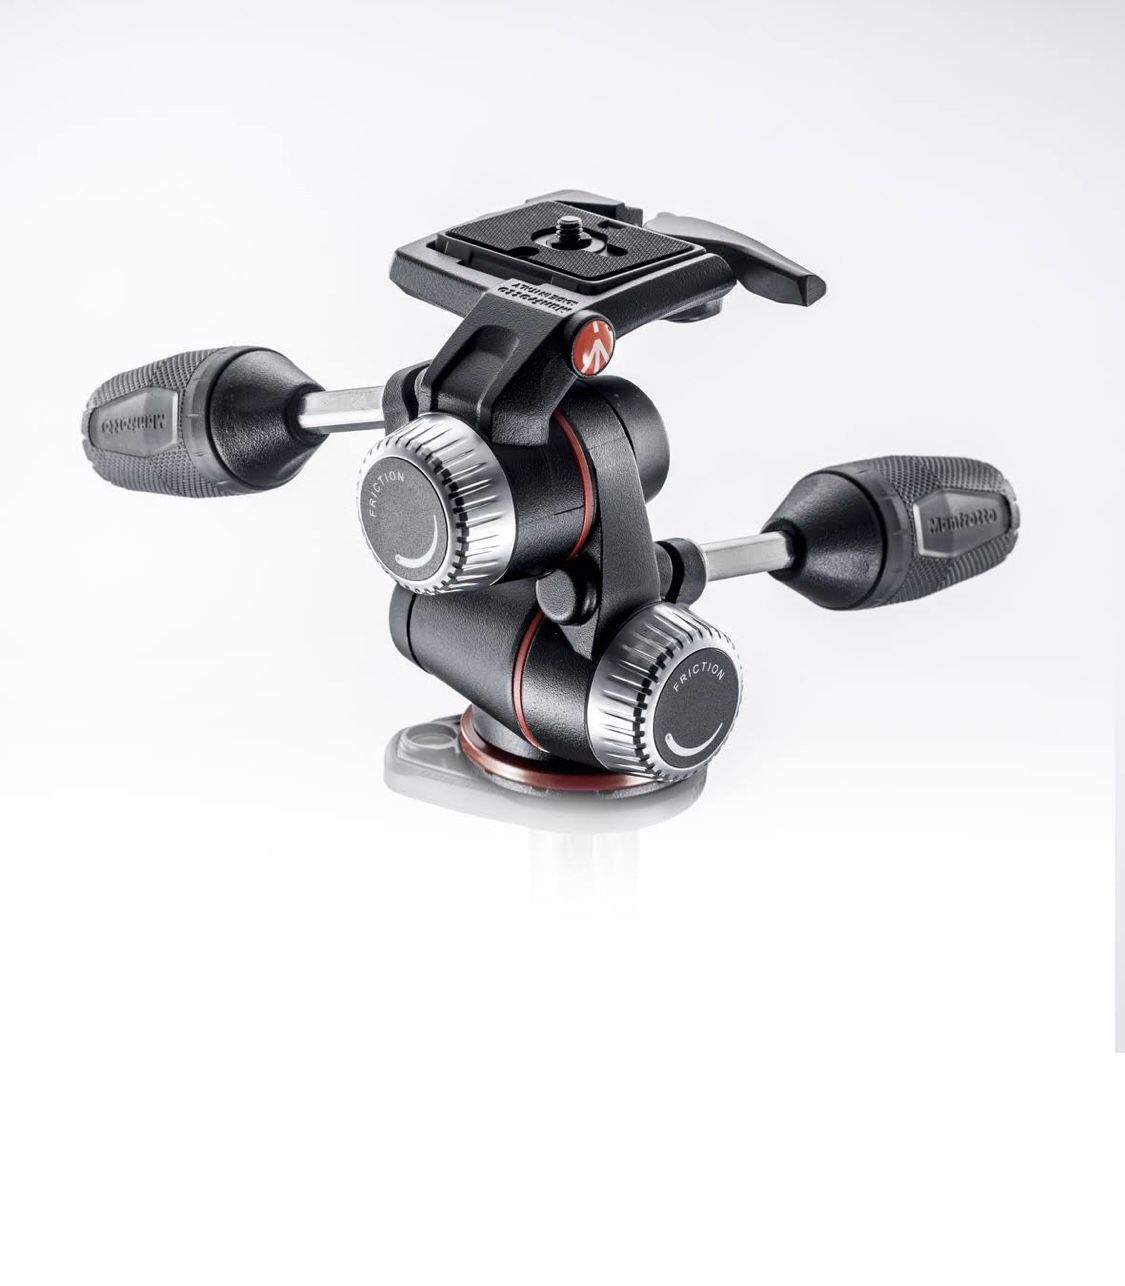 Manfrotto MHXPRO- 3W 3 way tripod head